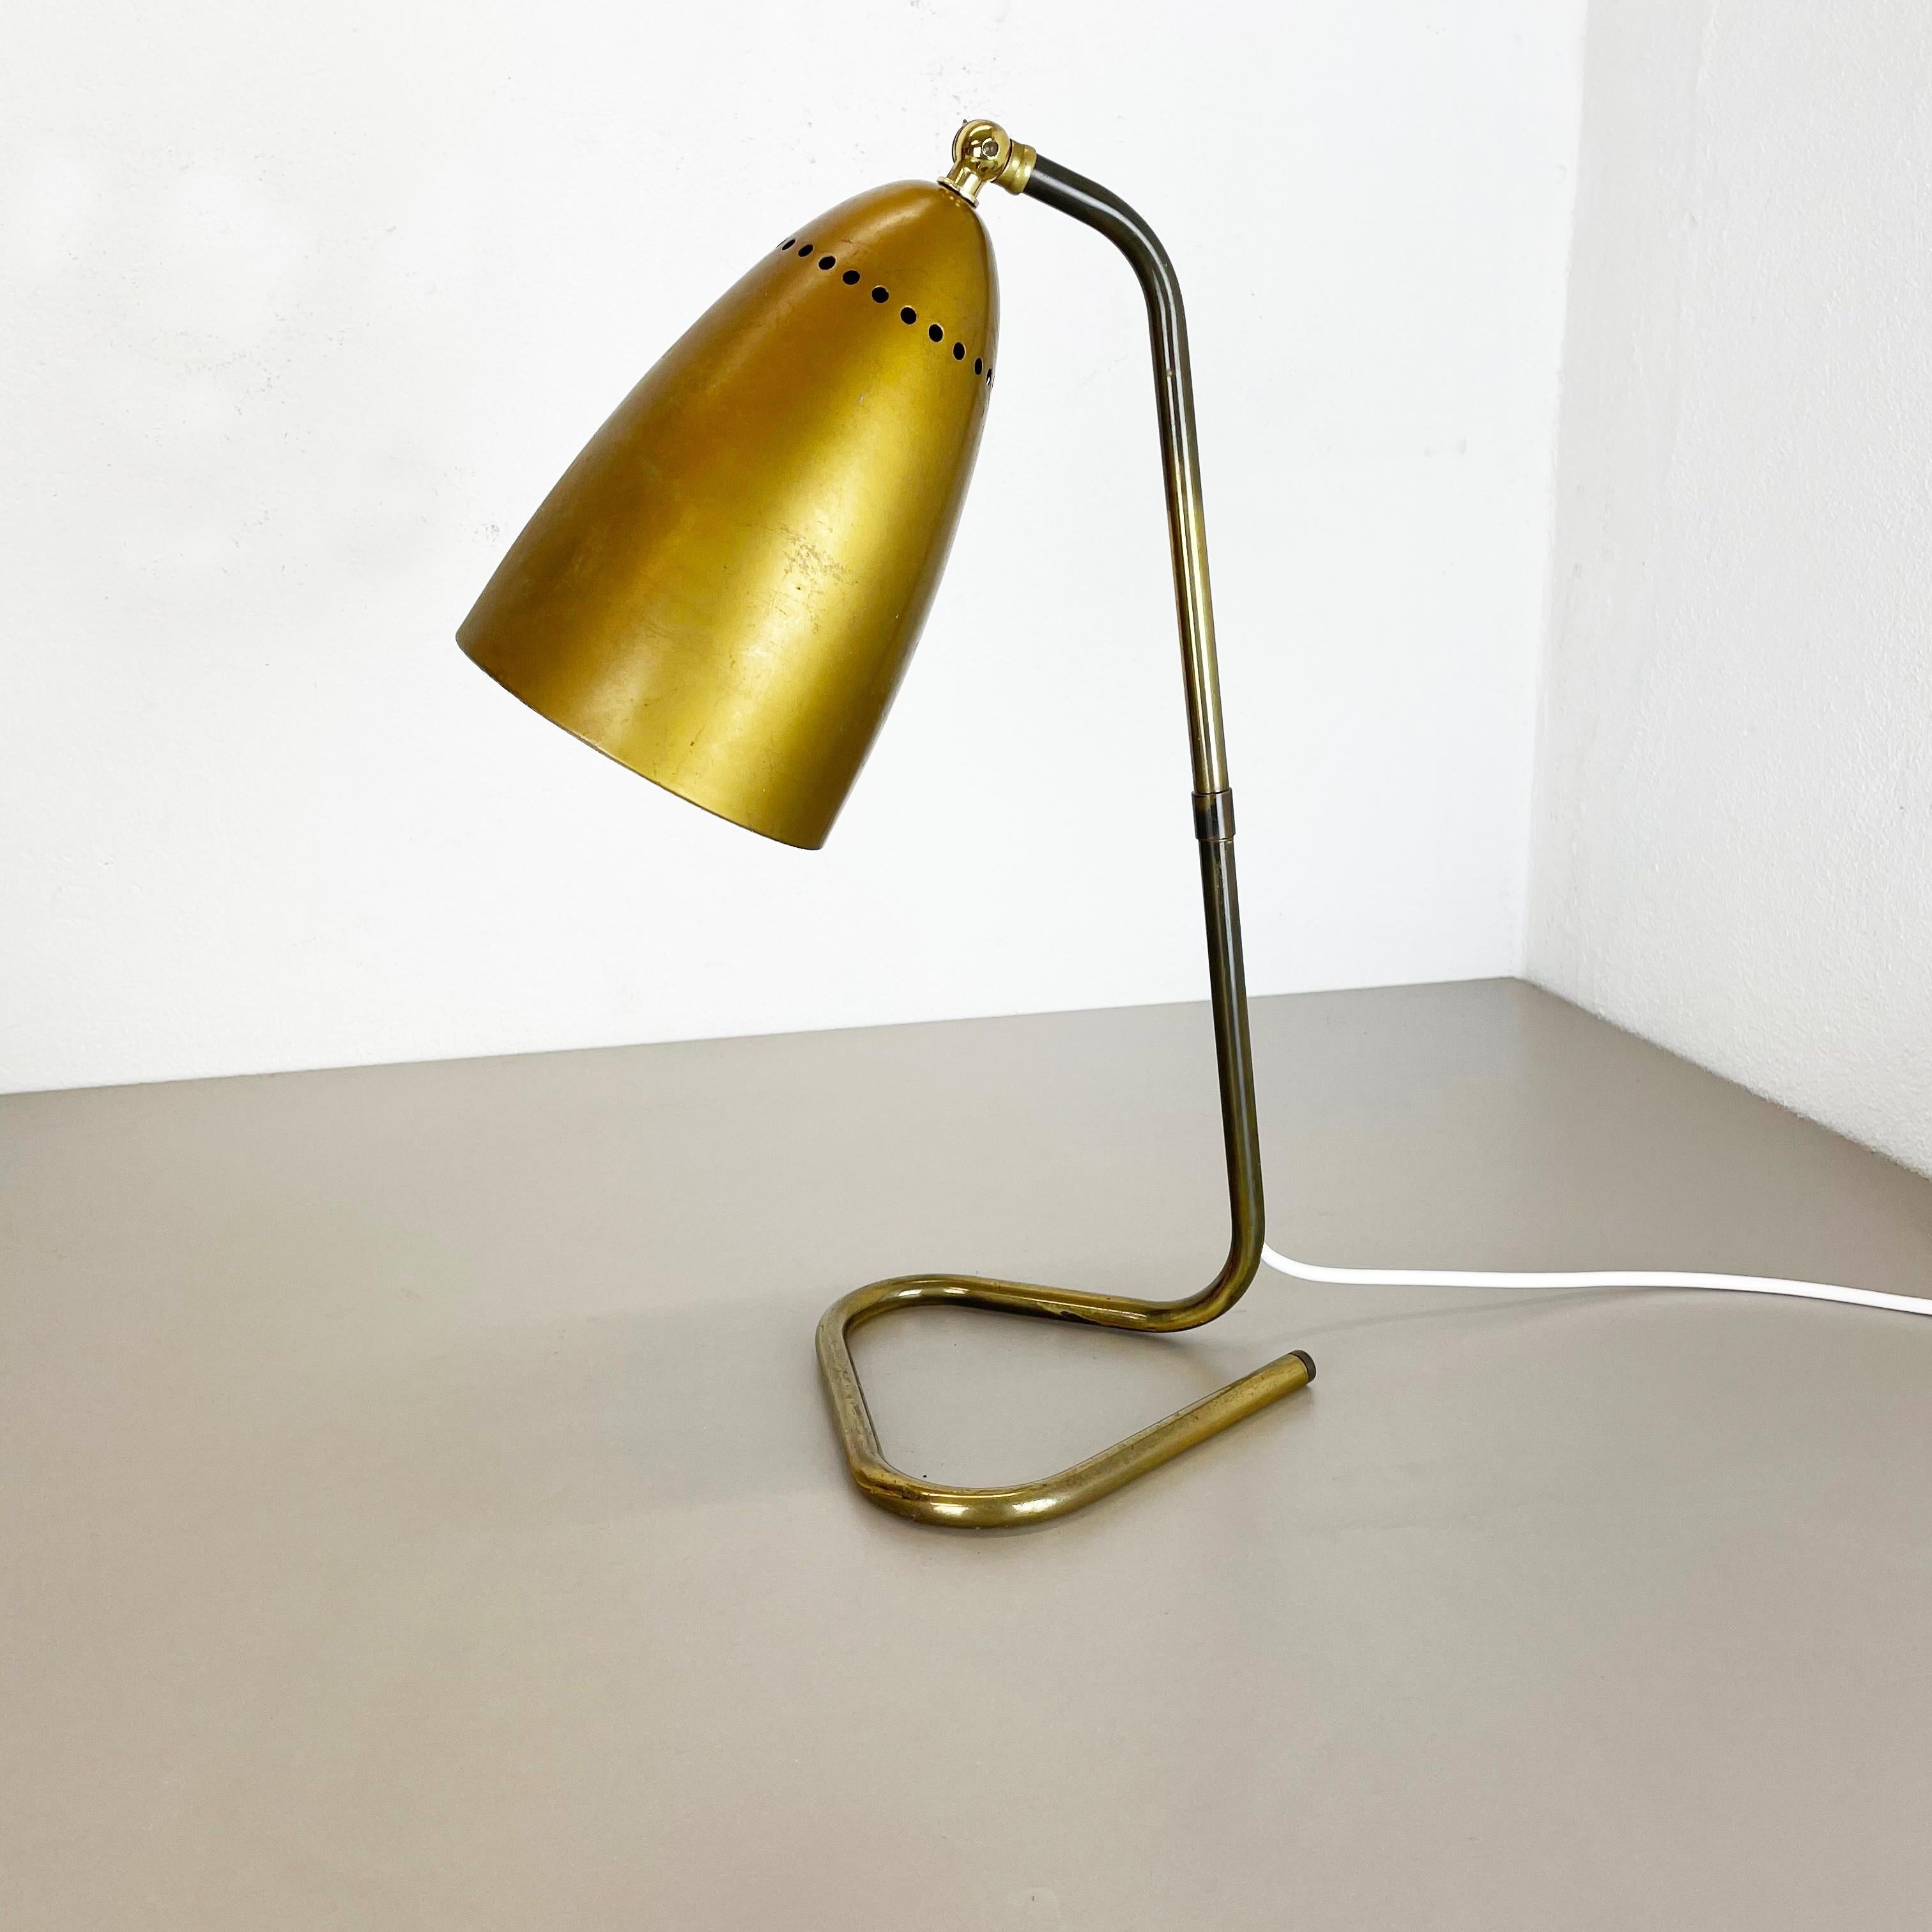 Article:

table light


Origin:

Austria


Age:

1950s


This original vintage table light was designed and produced in the 1950s in Austria. The super rare and Minimalist loop form stand element is made of brass. The light features